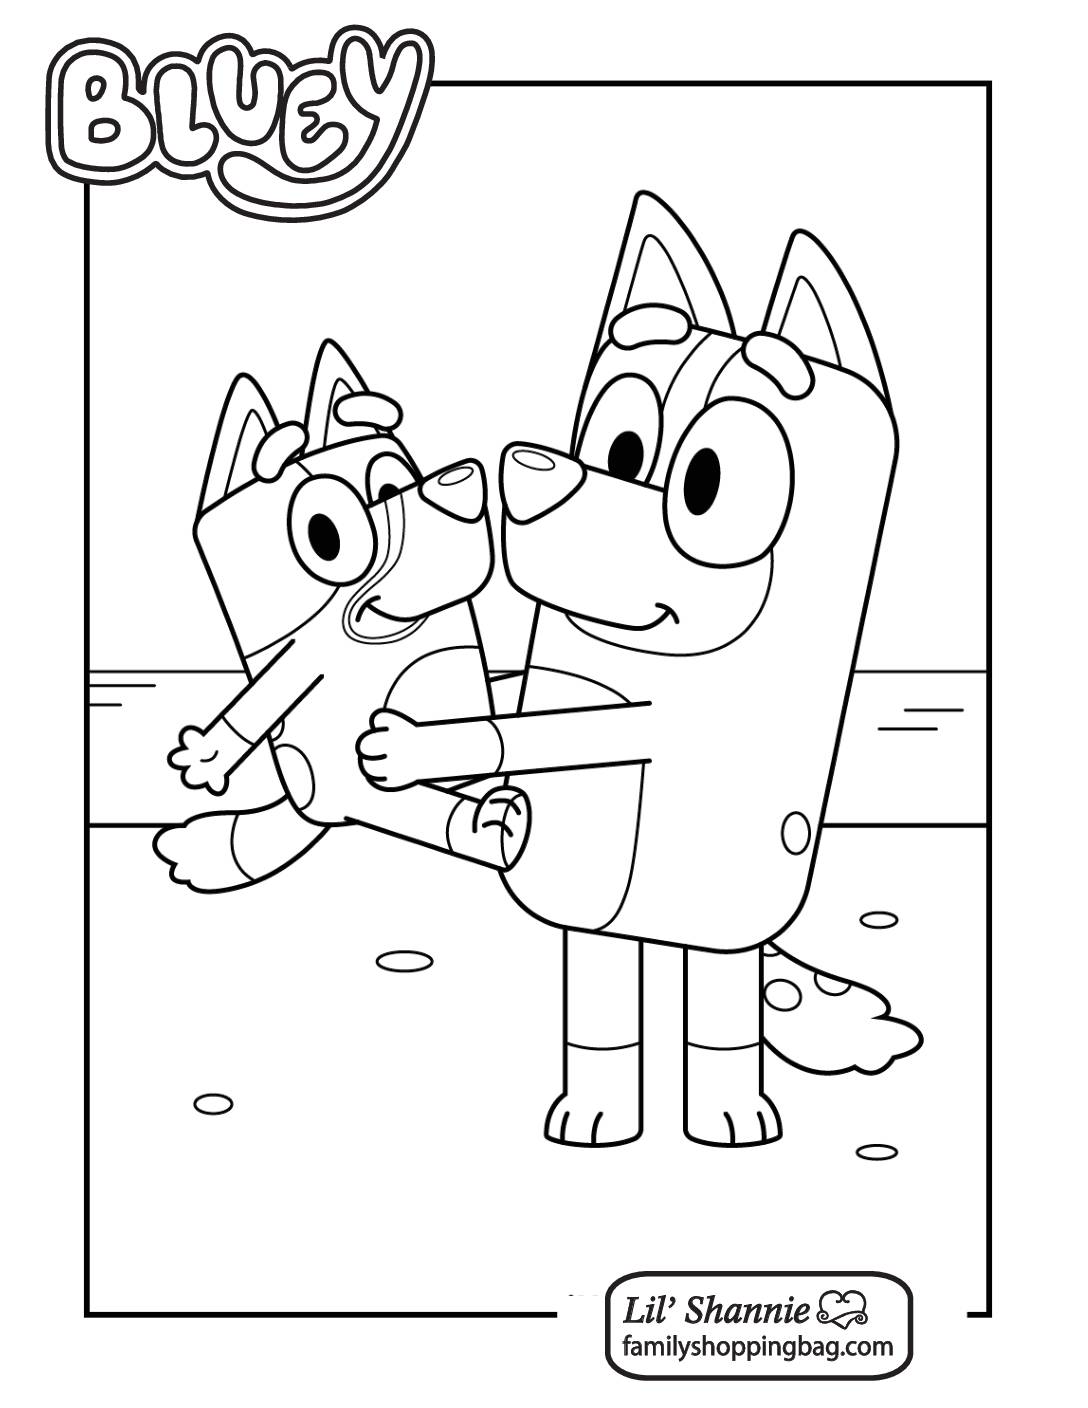 Coloring Page 4 Bluey Coloring Pages